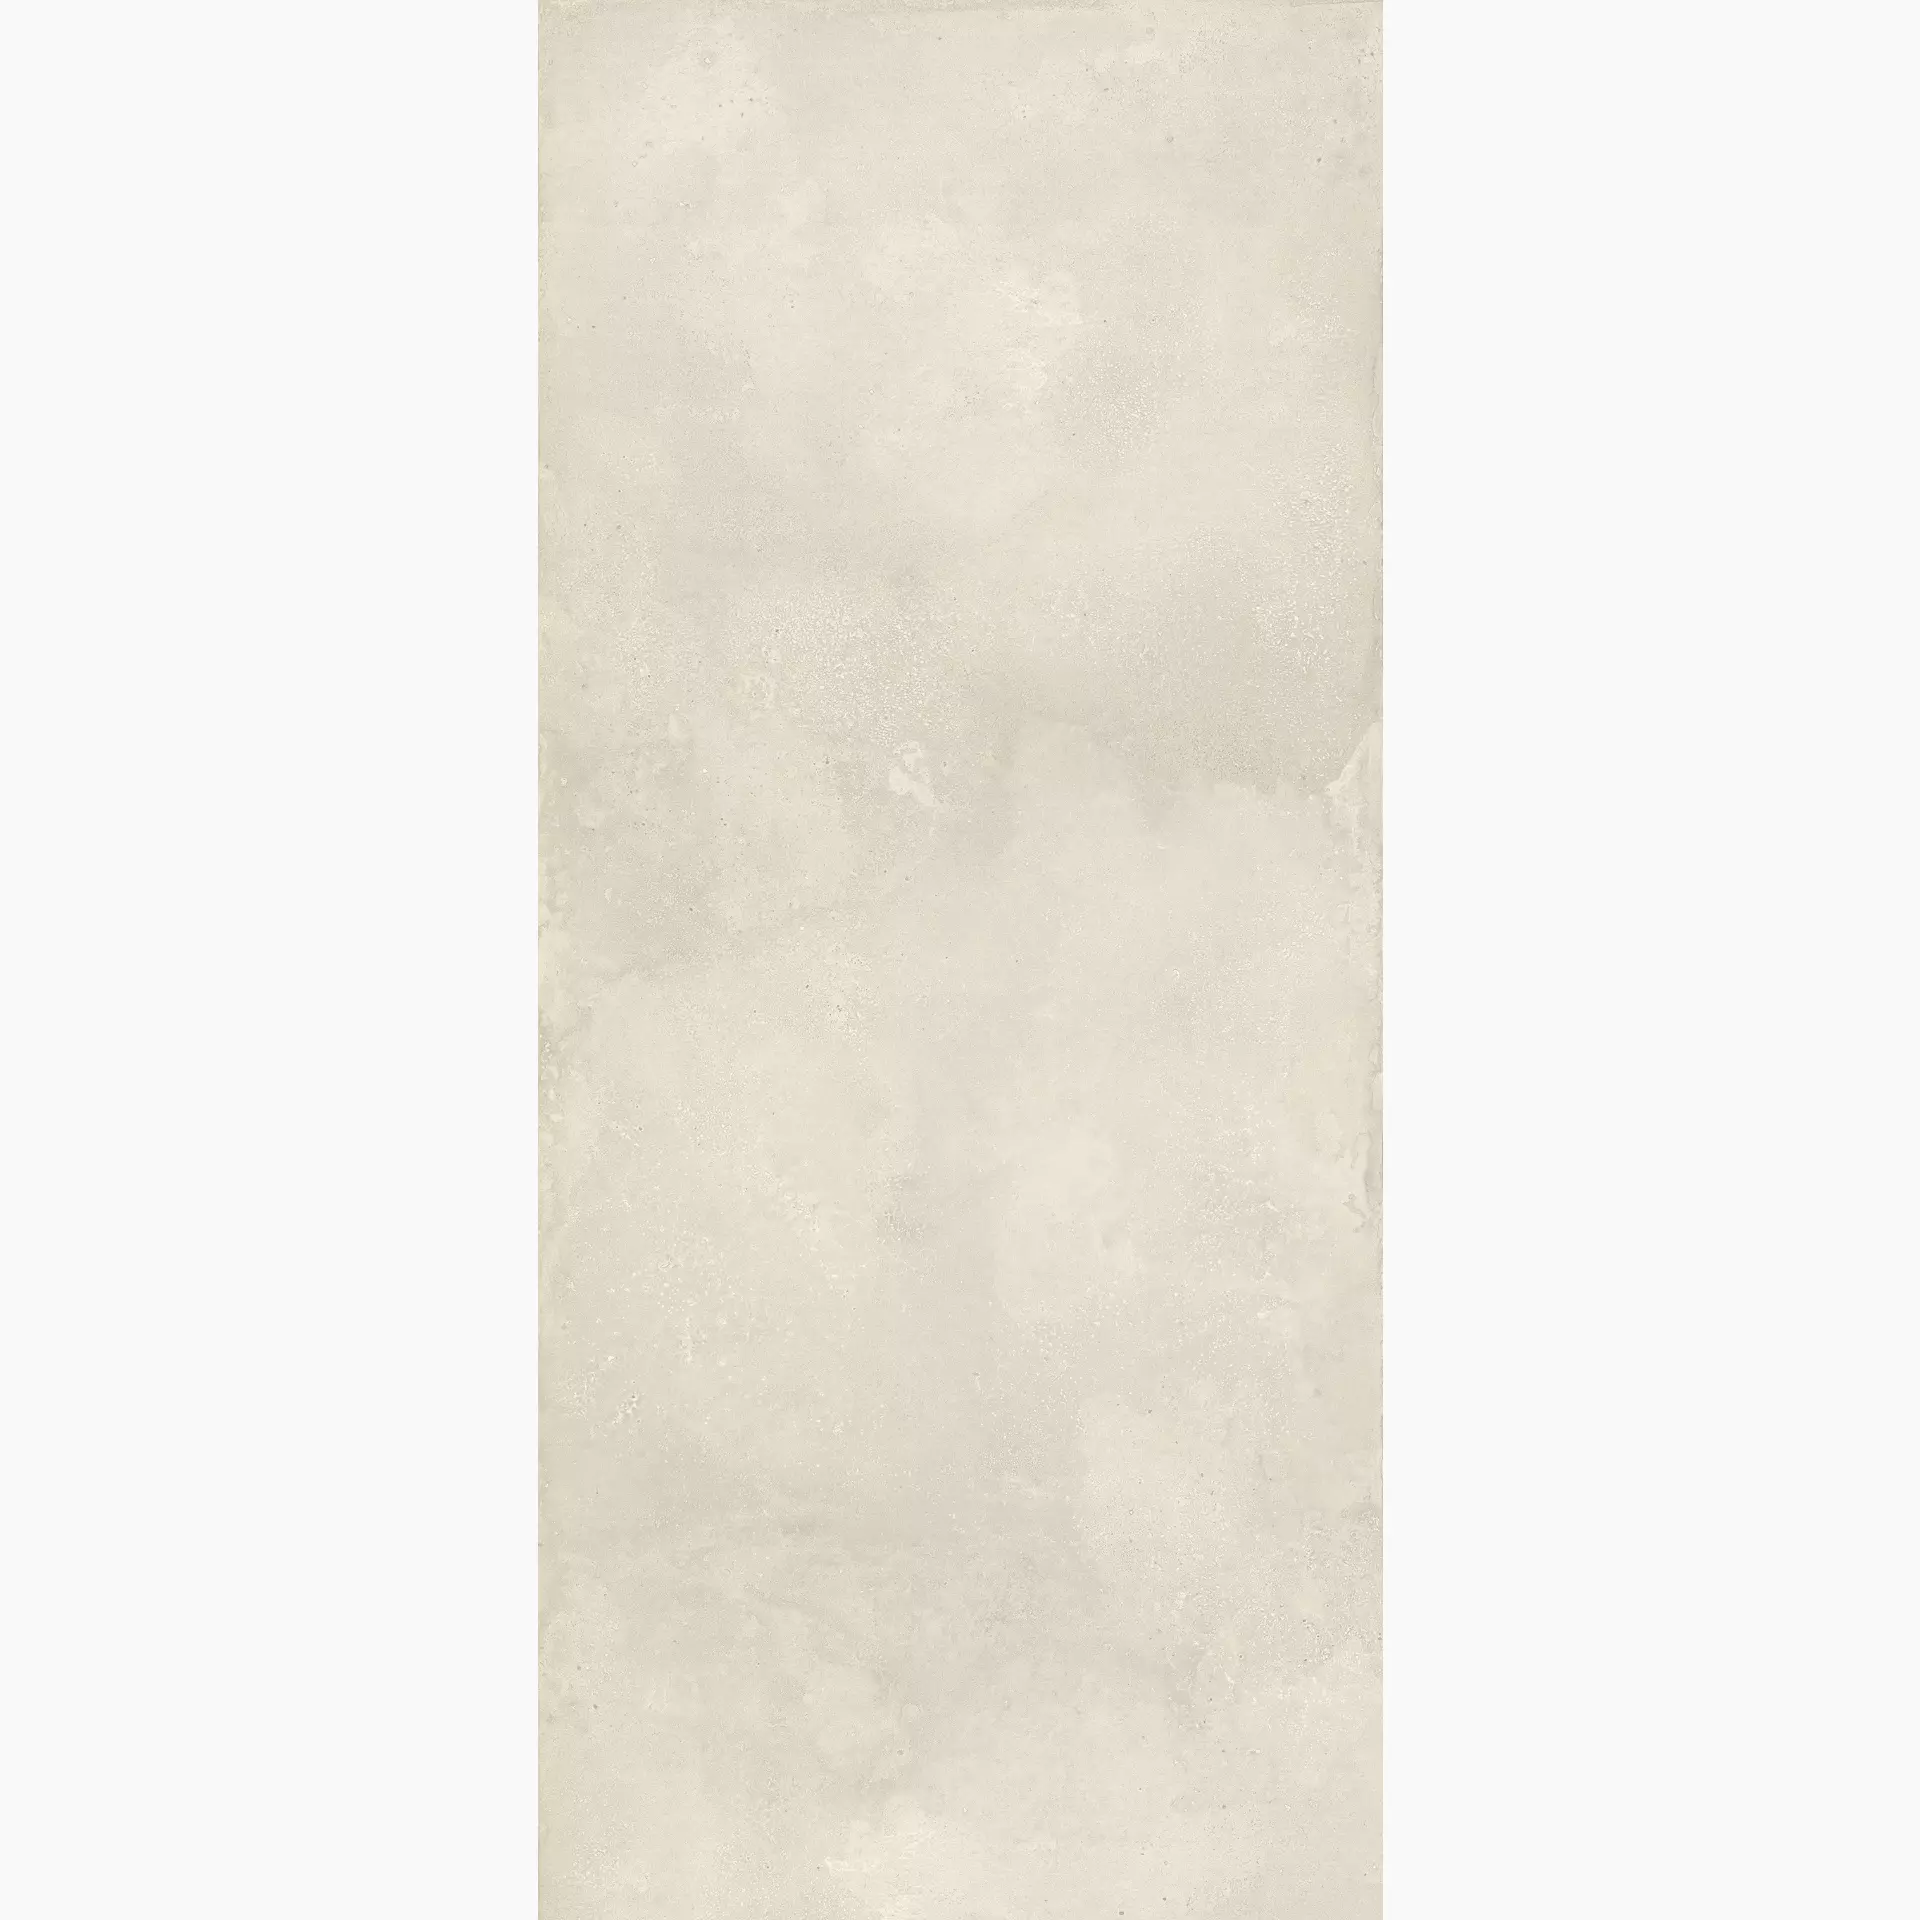 Fondovalle Pigmento Gesso Natural PGM029 120x278cm rectified 6,5mm